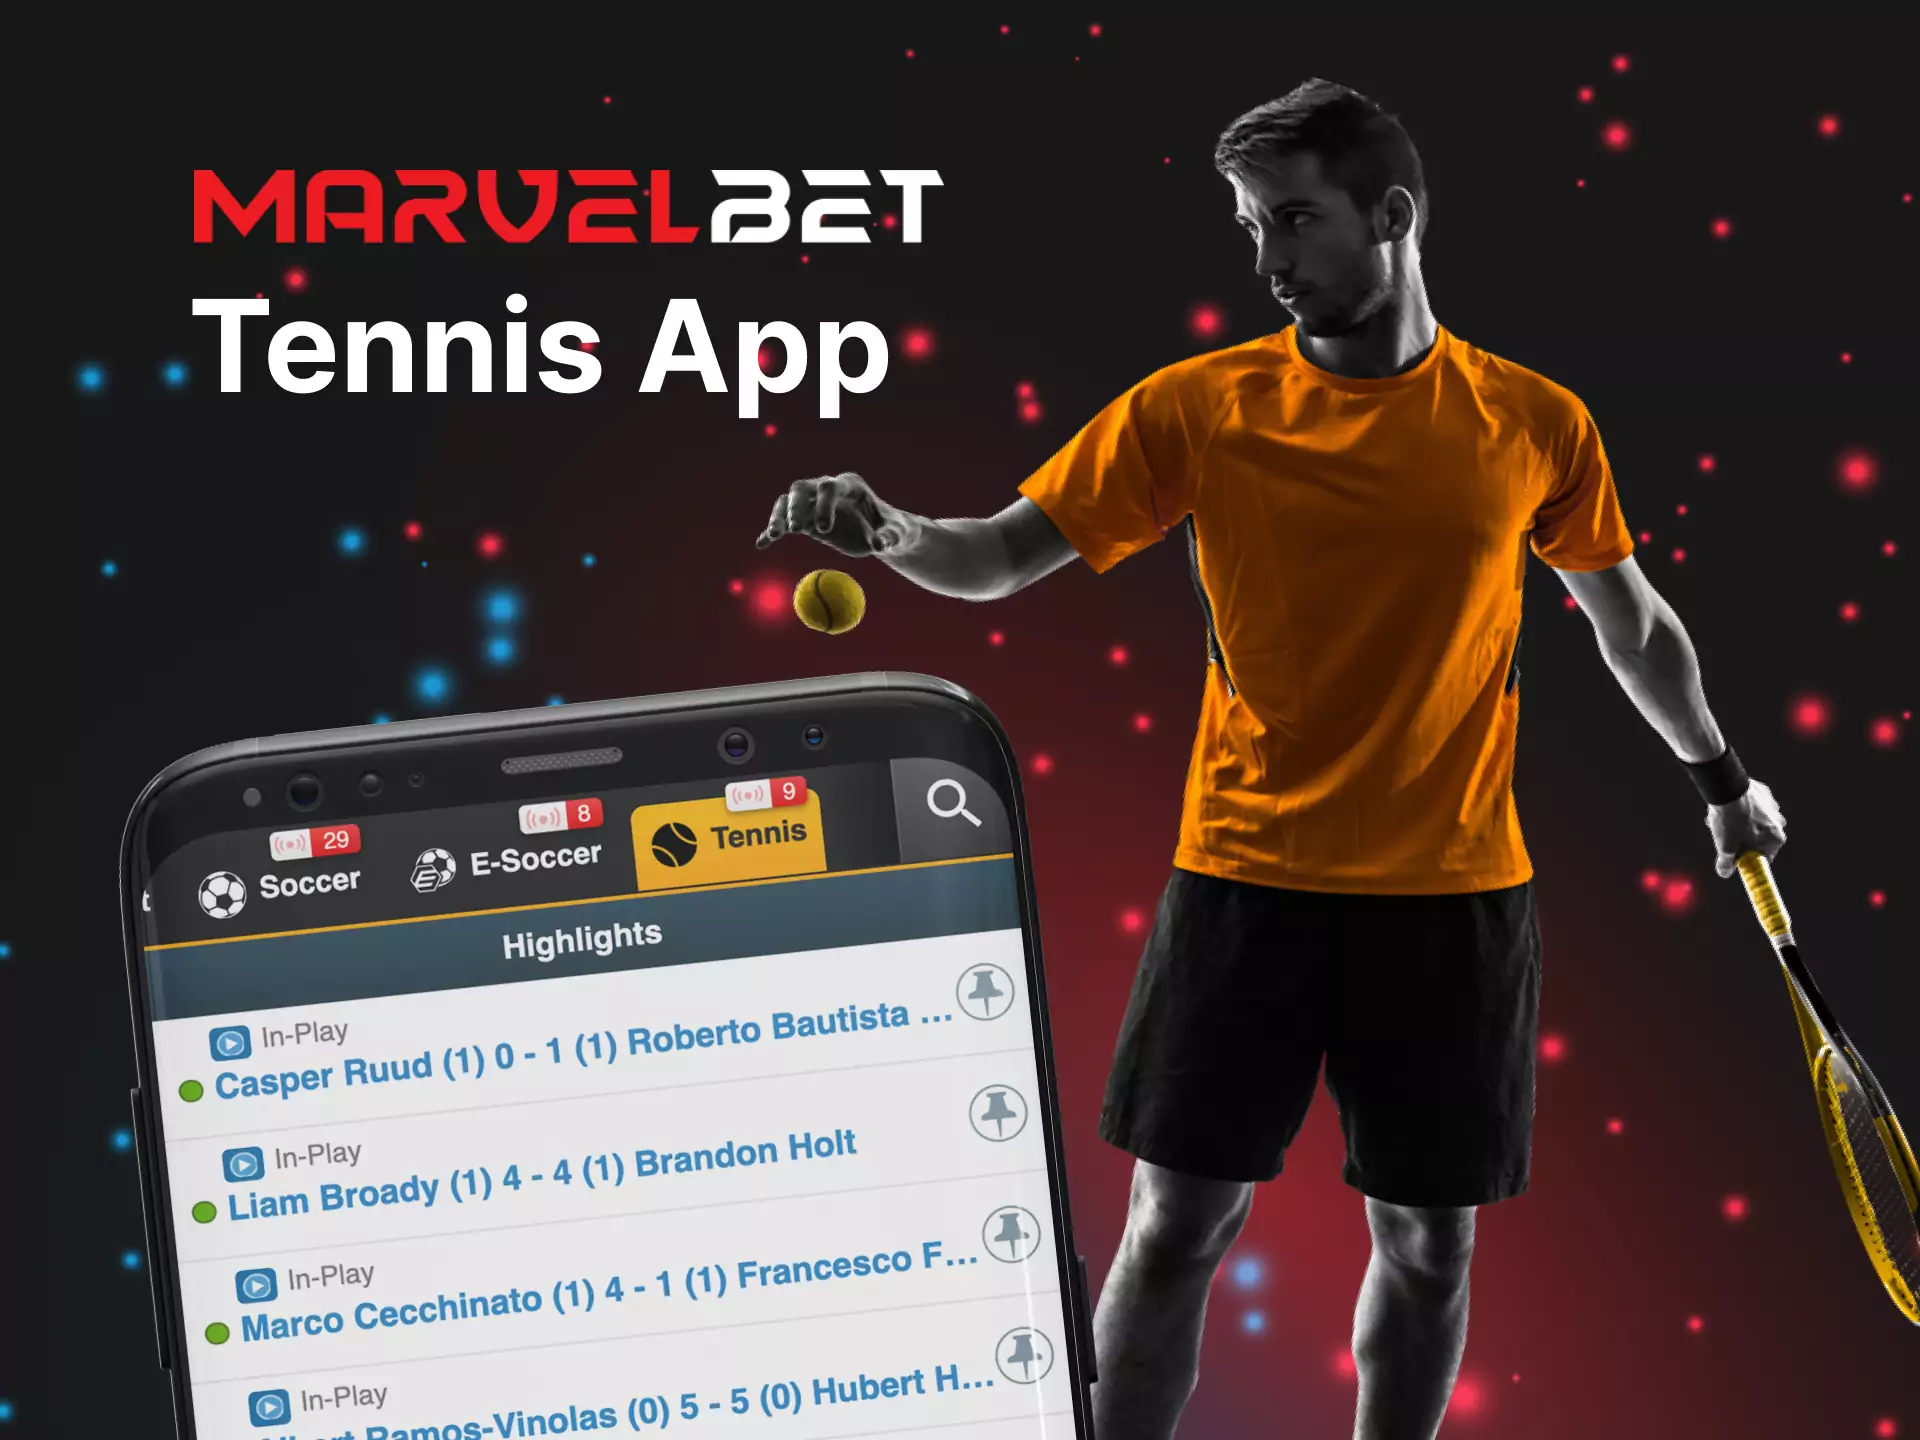 Betting on tennis is popular on Marvelbet as well.